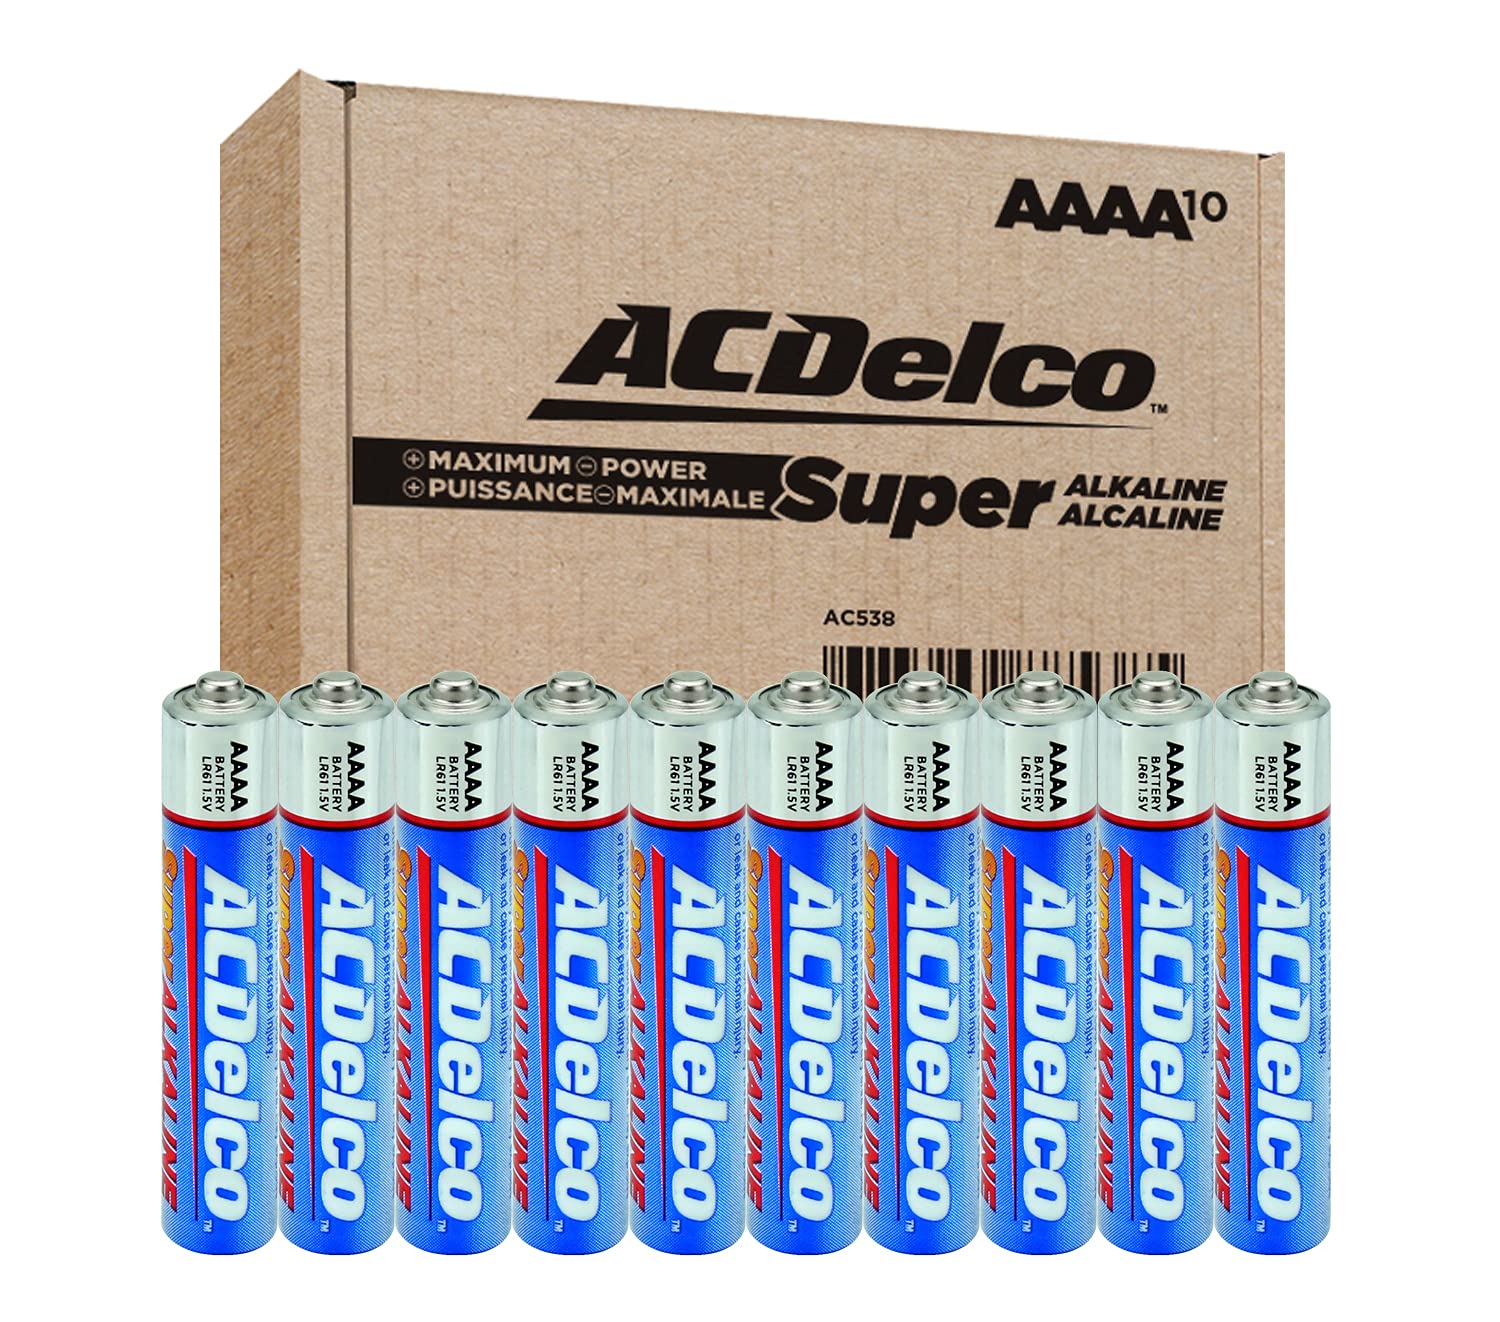 ACDelco 10-Count AAAA Batteries, Maximum Power Super Alkaline Battery, Use for Glucose Meters and Blood Monitors, 5-Year Shelf Life